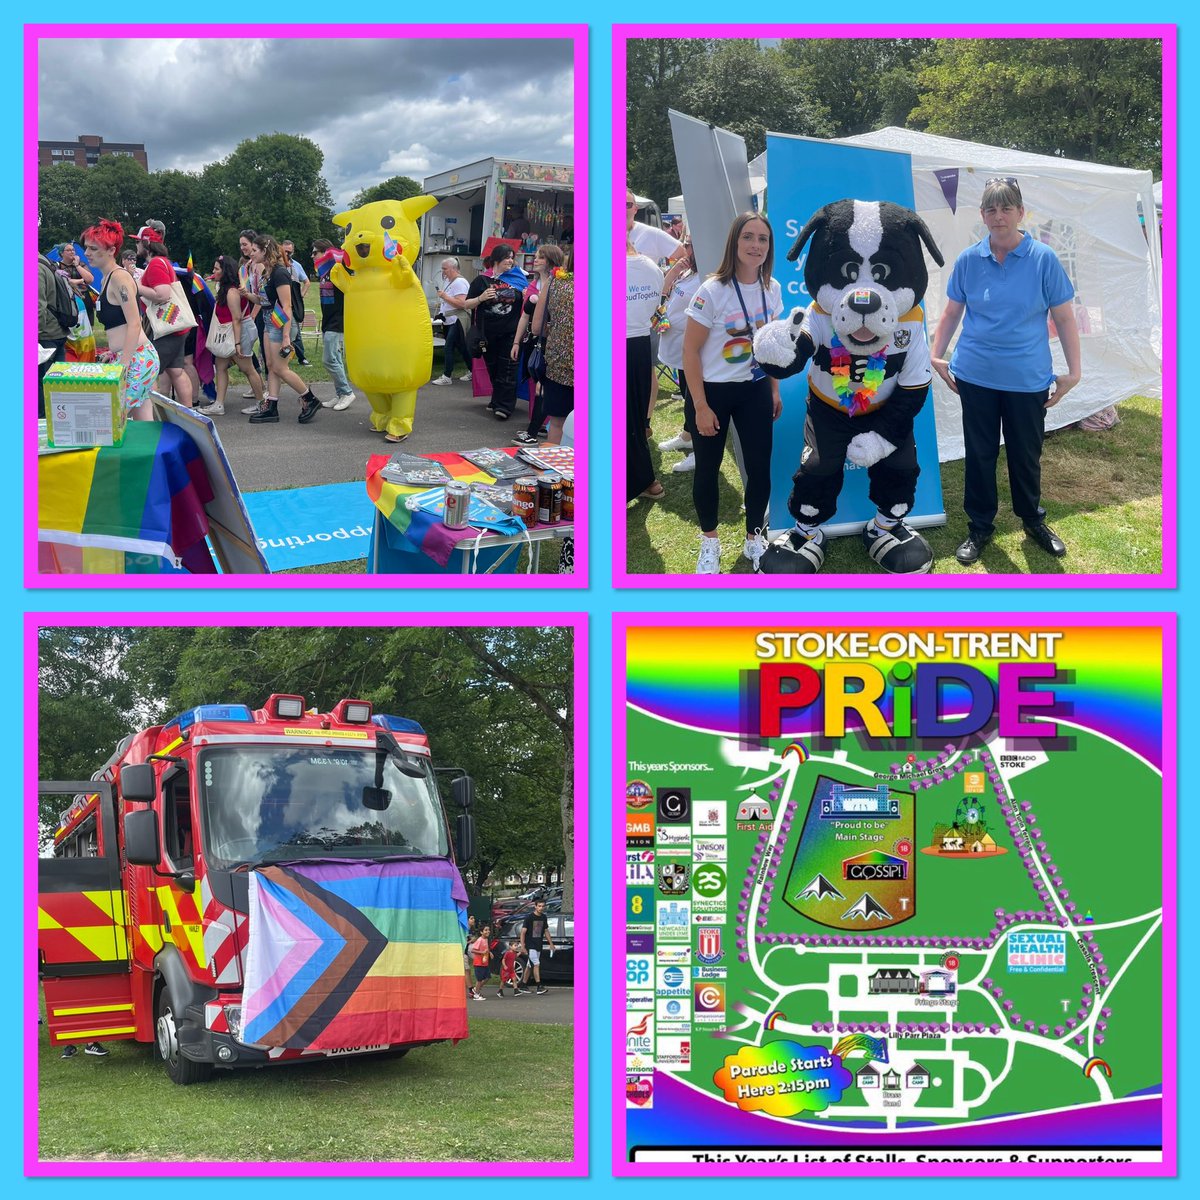 Proud to be a part of and represent the @coopuk at this years stoke-on-Trent pride event along with colleagues on 408. As one of our local causes it’s great to see the difference our support has made to our local communities🌈 ☀️😊#Pride2023 #beyourselfalways